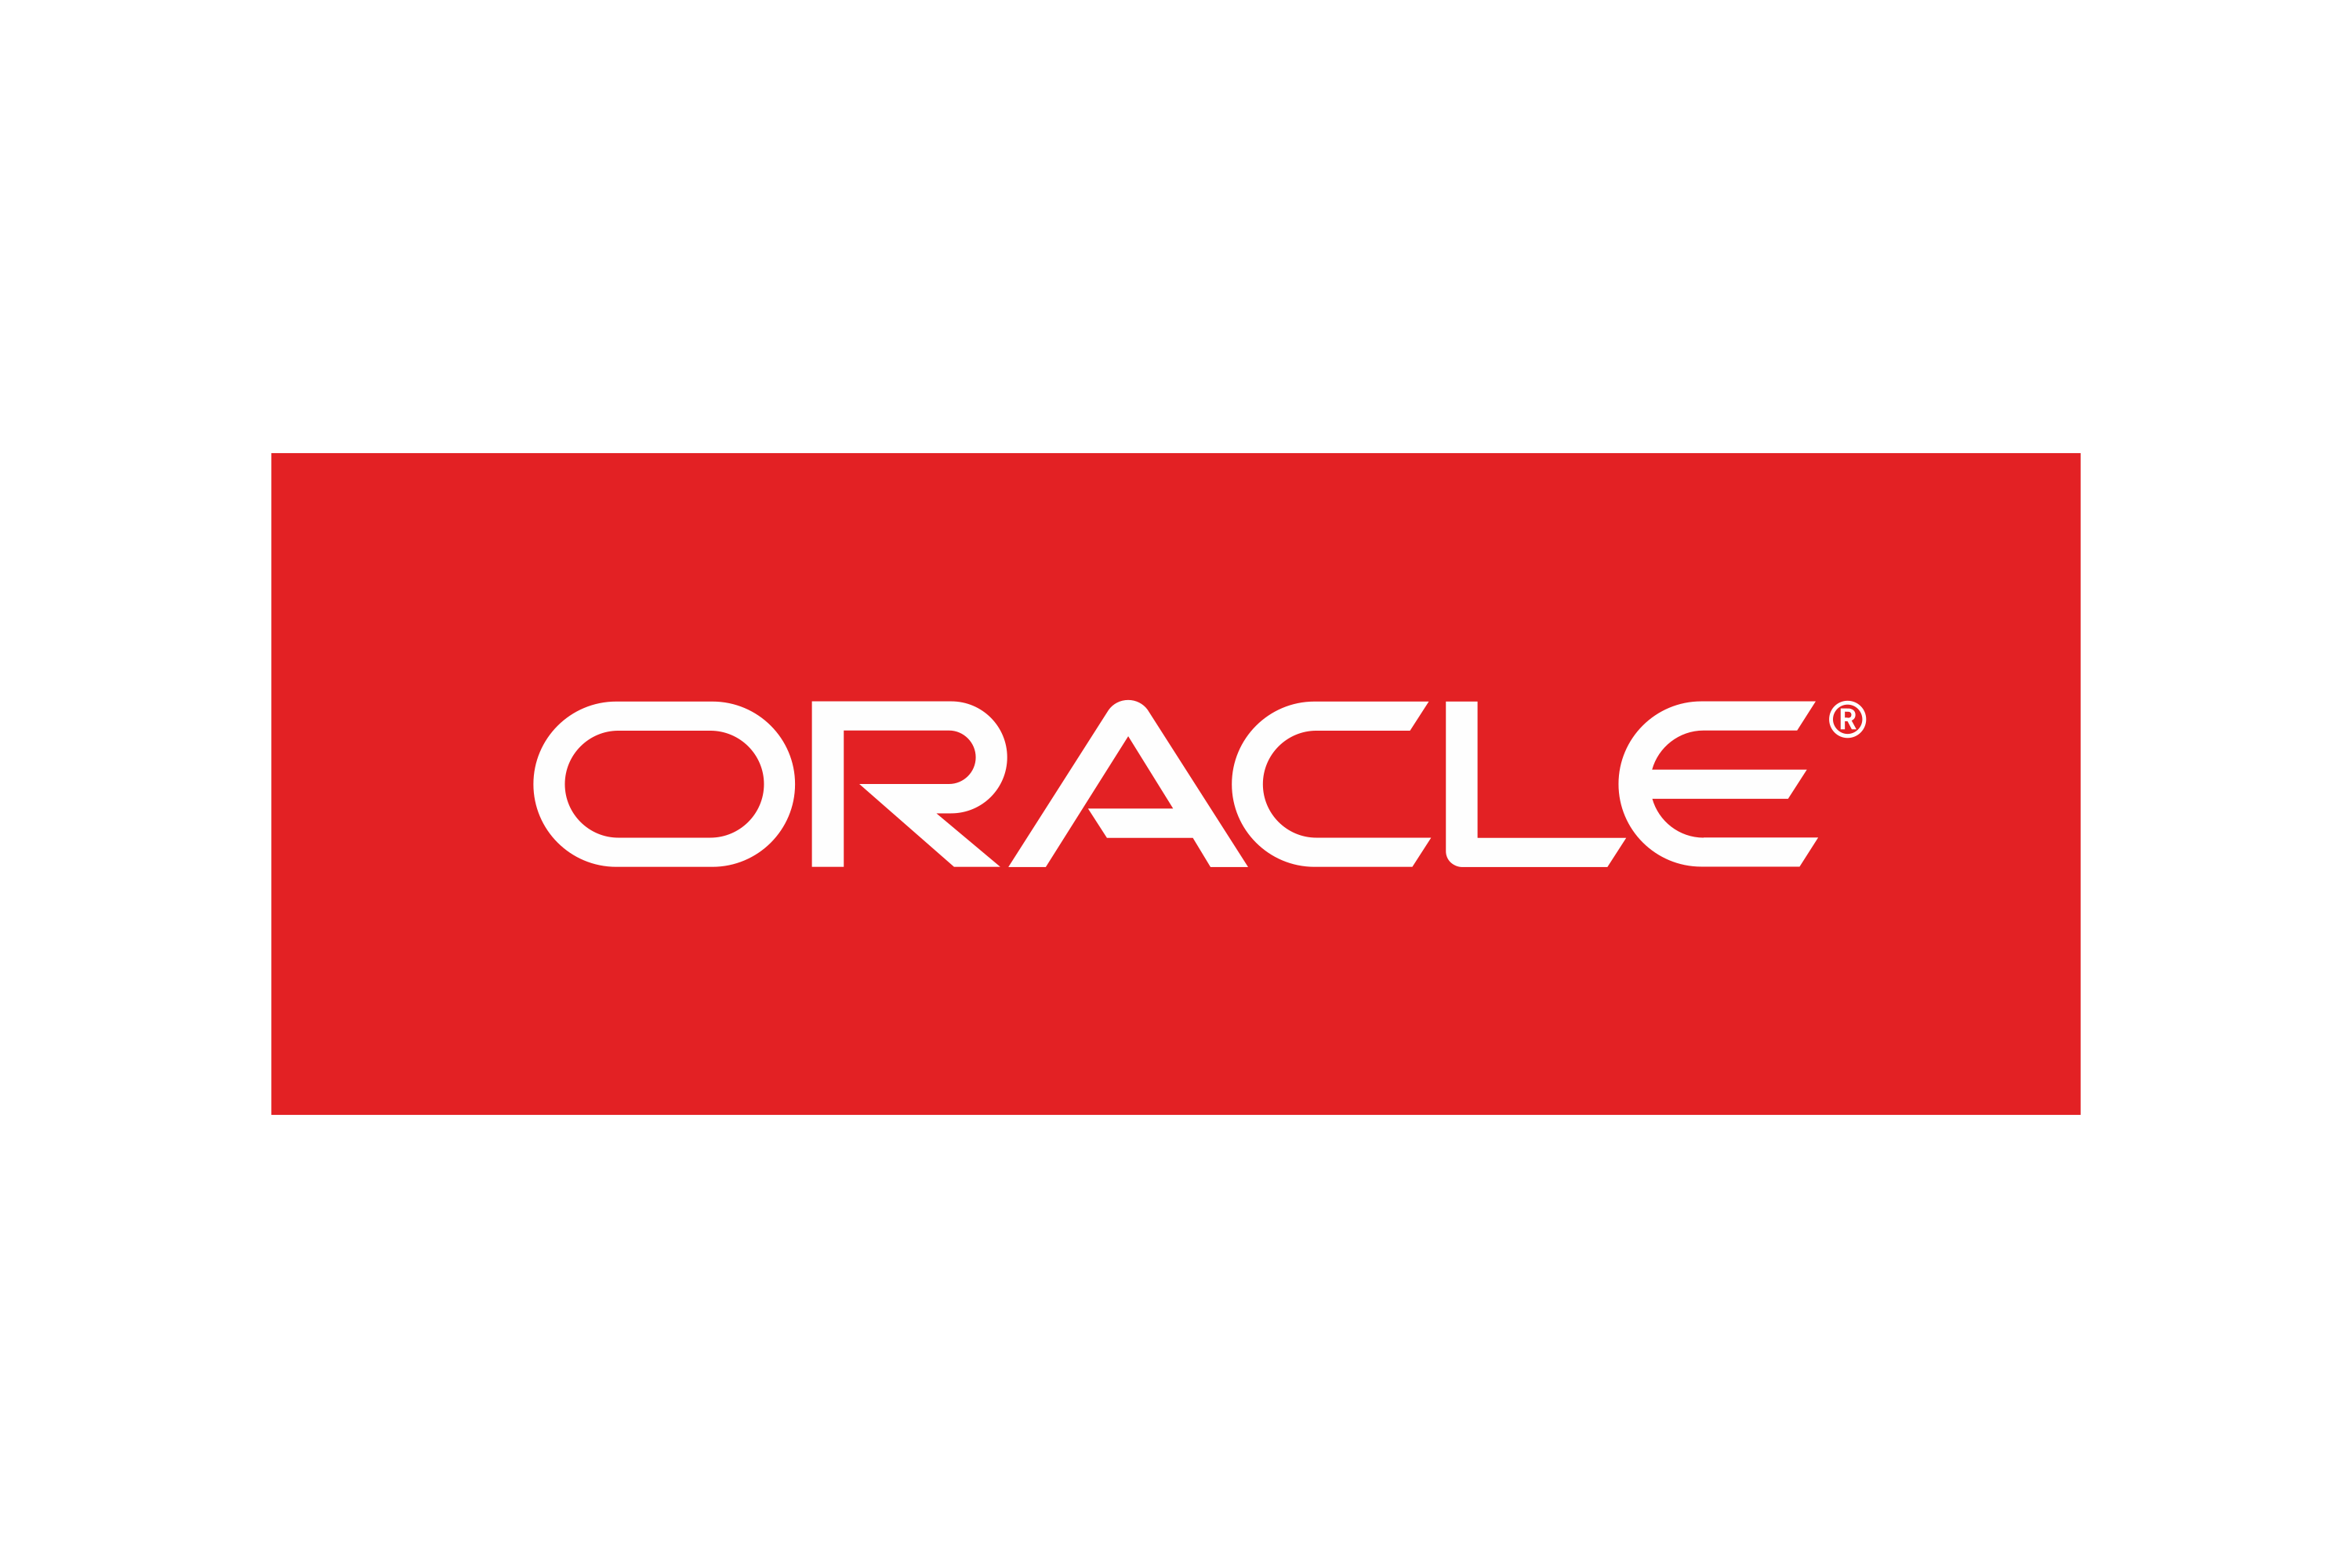 Download Oracle Corporation Logo in SVG Vector or PNG File Format